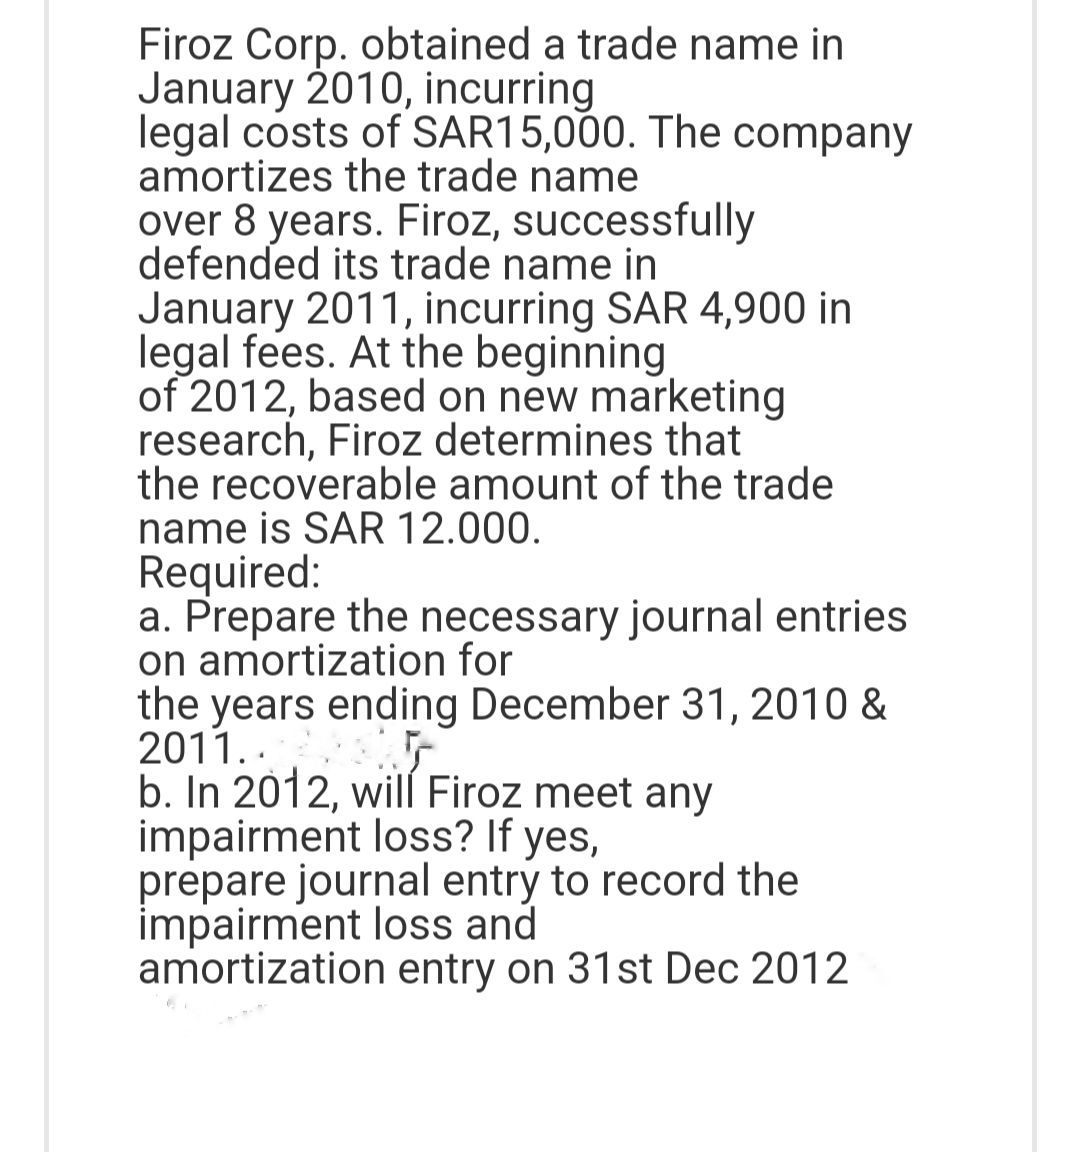 Firoz Corp. obtained a trade name in
January 2010, incurring
legal costs of SAR15,000. The company
amortizes the trade name
over 8 years. Firoz, successfully
defended its trade name in
January 2011, incurring SAR 4,900 in
legal fees. At the beginning
of 2012, based on new marketing
research, Firoz determines that
the recoverable amount of the trade
name is SAR 12.000.
Required:
a. Prepare the necessary journal entries
on amortization for
the years ending December 31, 2010 &
2011..
b. In 2012, will Firoz meet any
impairment loss? If yes,
prepare journal entry to record the
impairment loss and
amortization entry on 31st Dec 2012